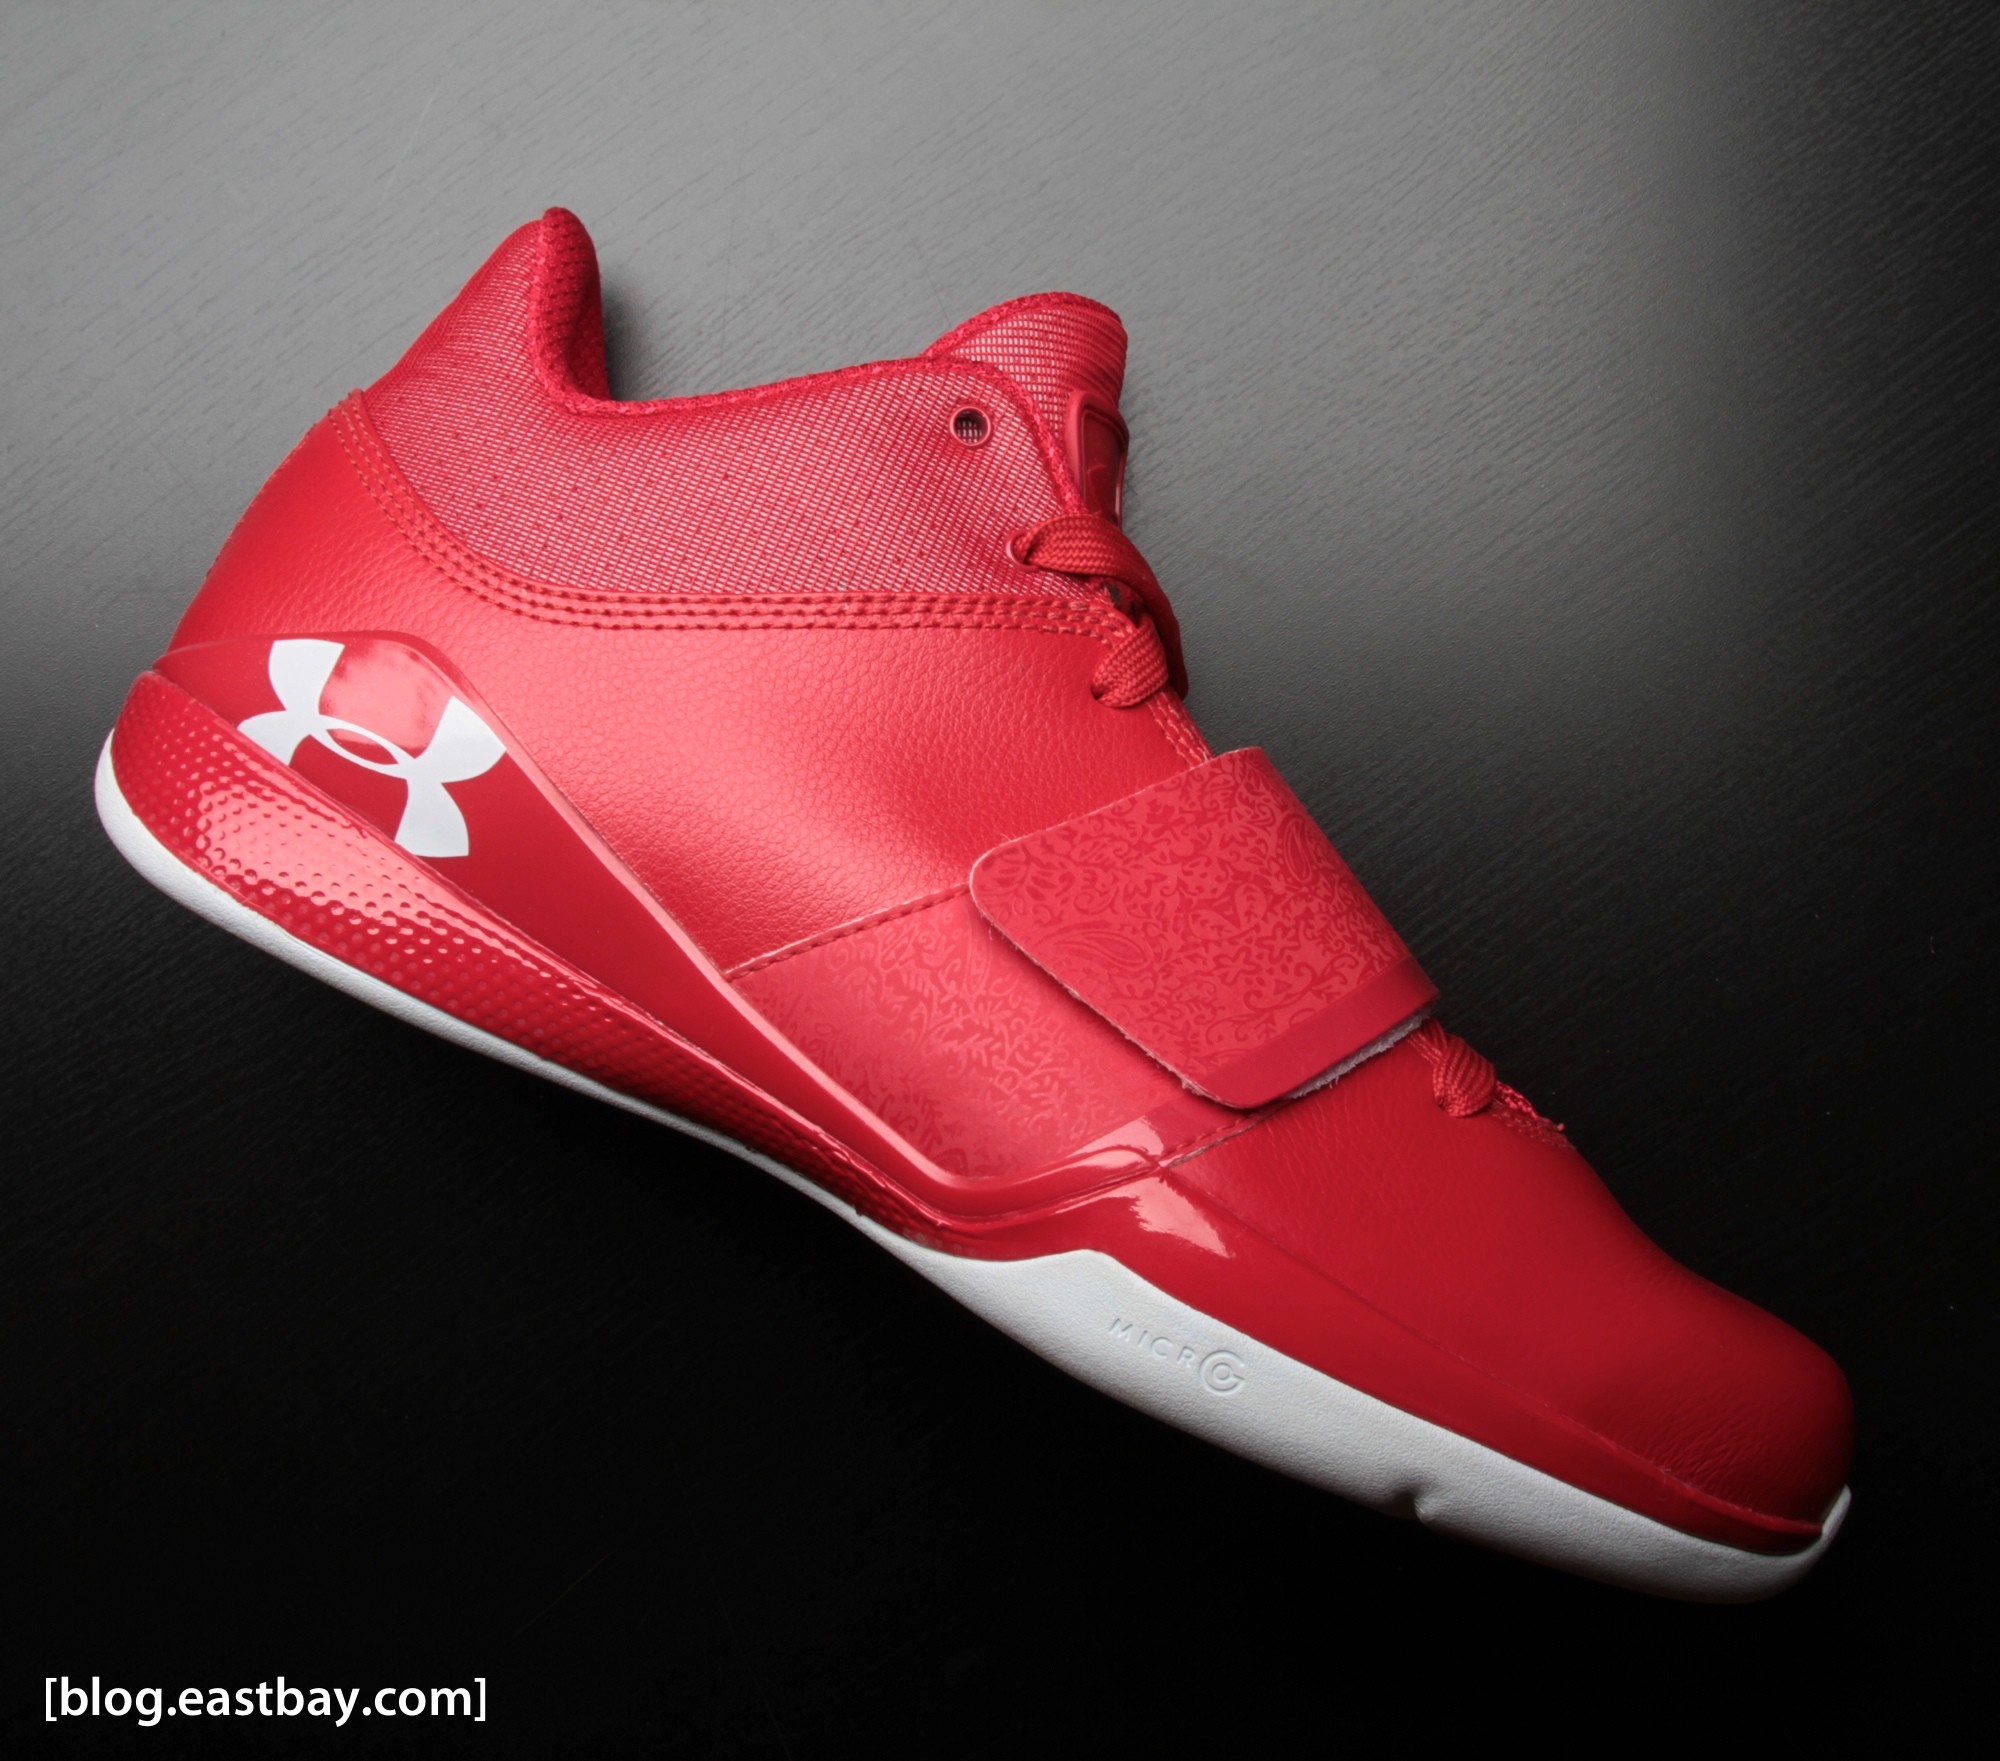 Available now: Under Armour Micro G Bloodline – Compton Red